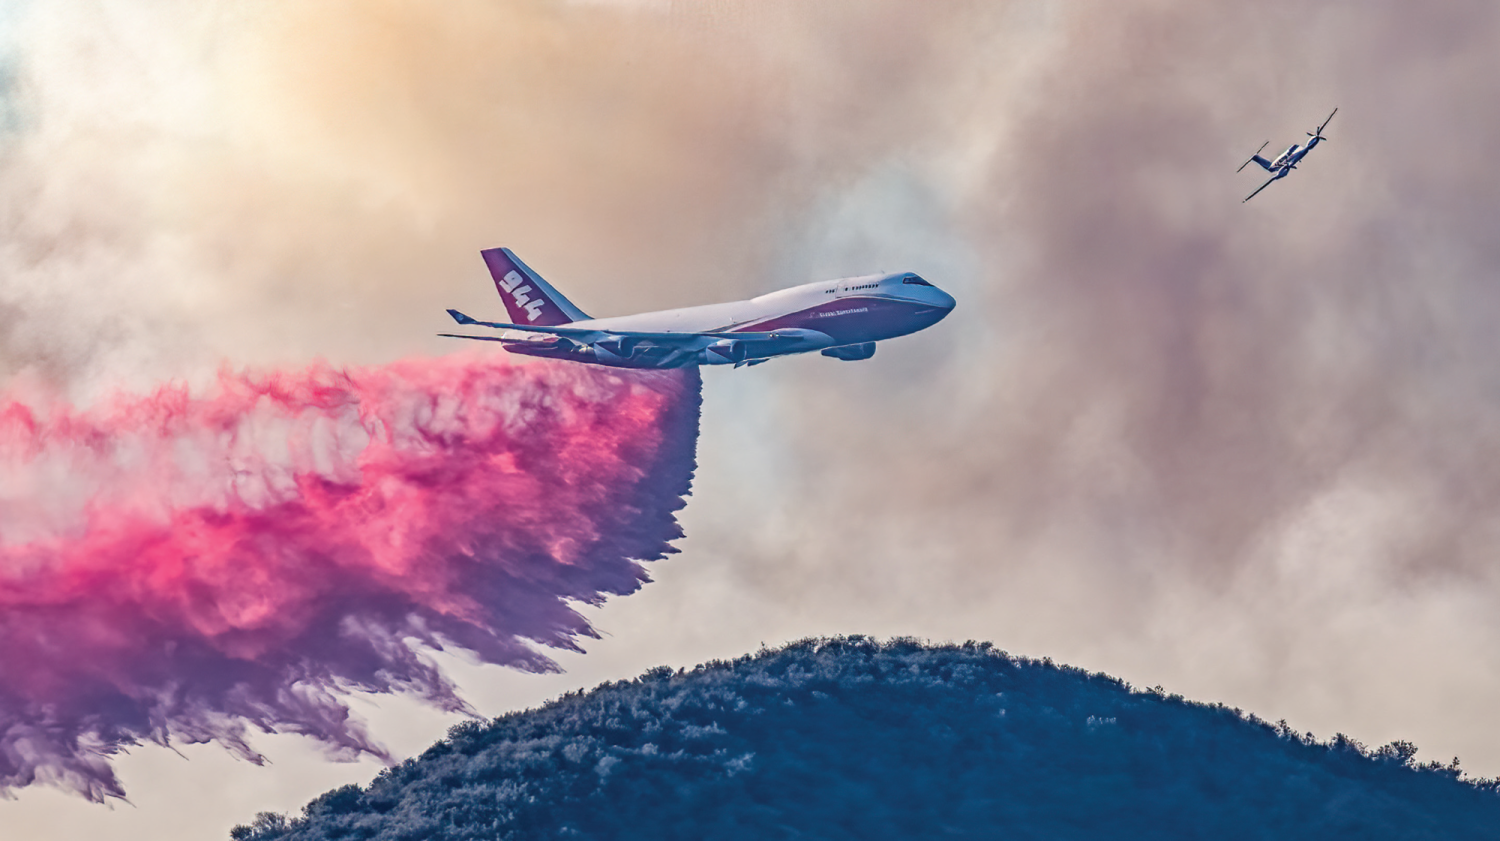 A T-944 Lead B 9 1 plane flies in front of the Global Supertanker at the Apple Fire in Riverside, California. Photo Courtesy of Steve_San_Diego